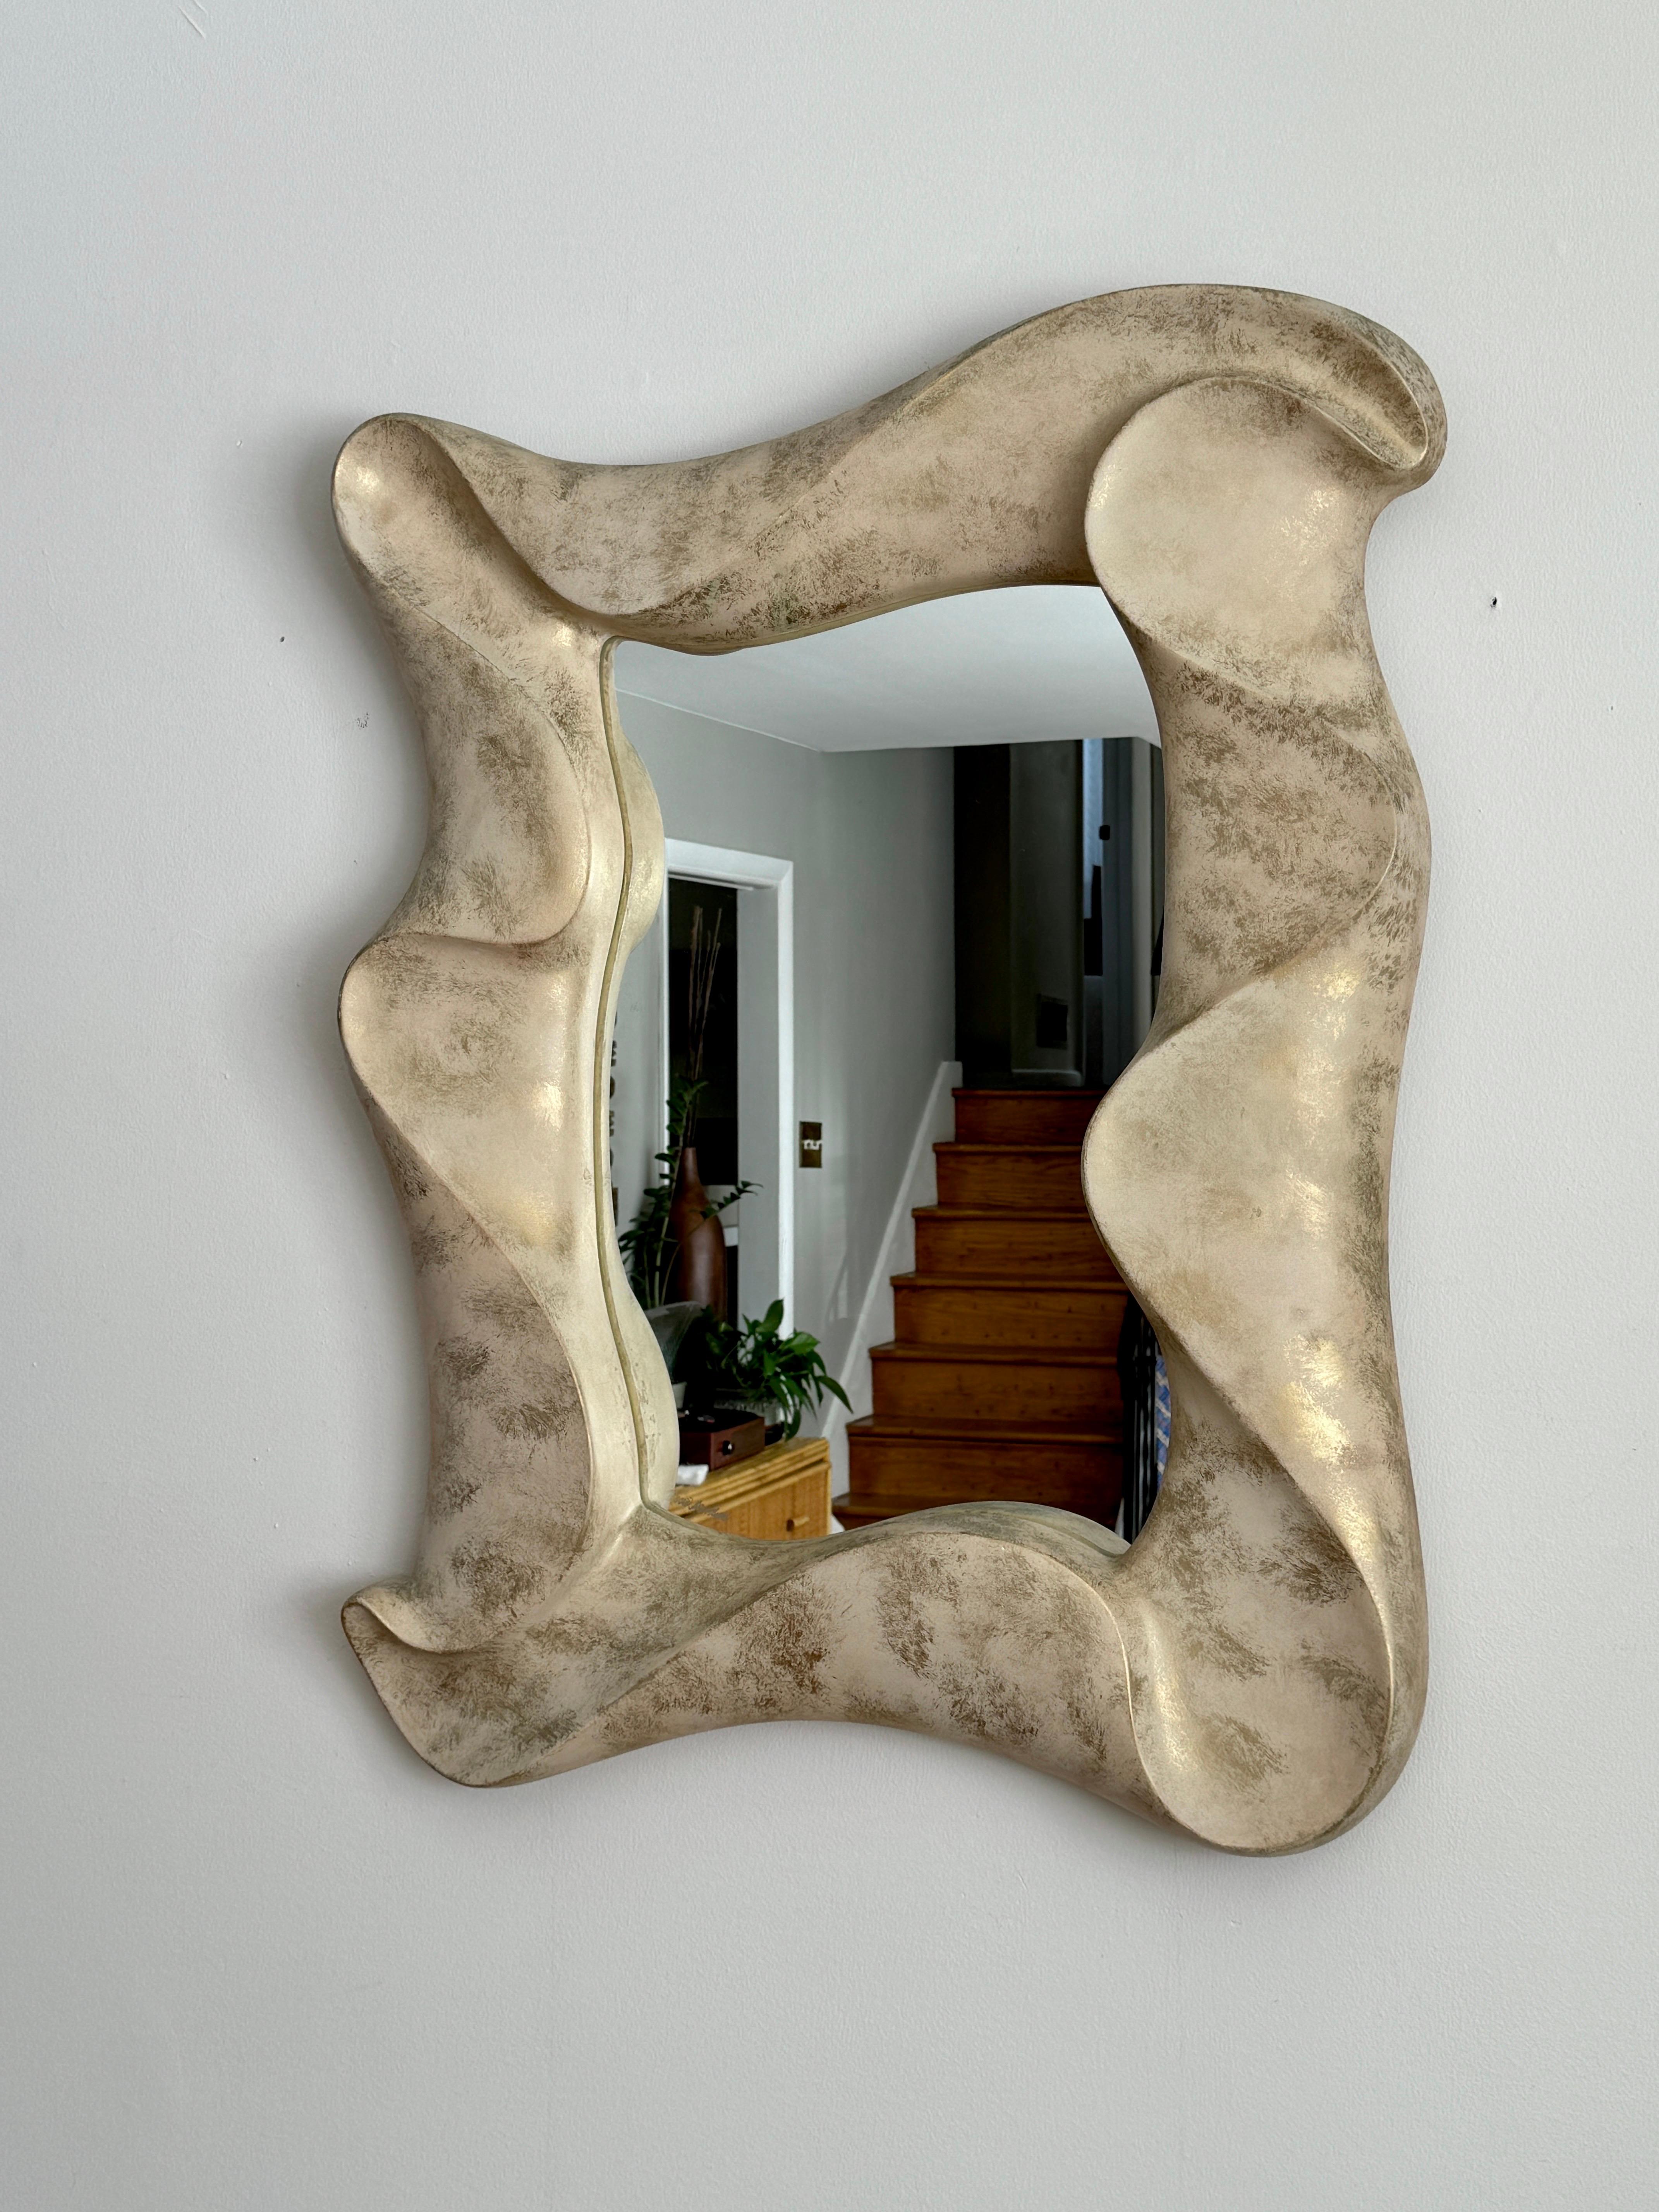 Unique statement wave-like mirror crafted by renowned artist David Marshall, featuring a stunningly sculpted stone-inspired aesthetic. Signed by the artist in the lower left corner. 